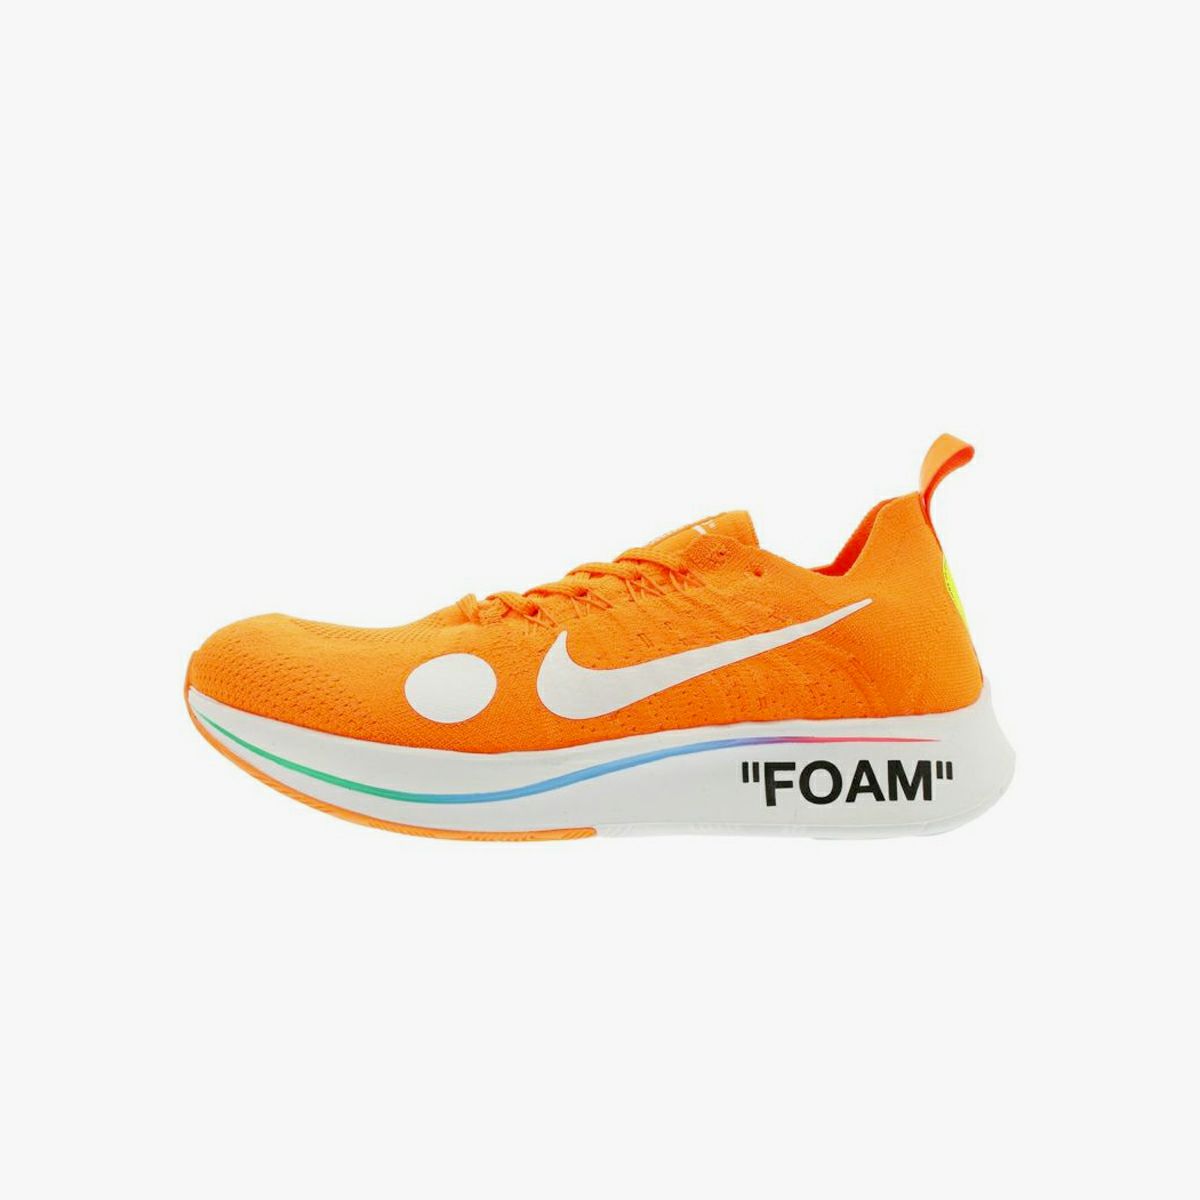 27.5cm Nike Off-White Zoon Fly Mercurial